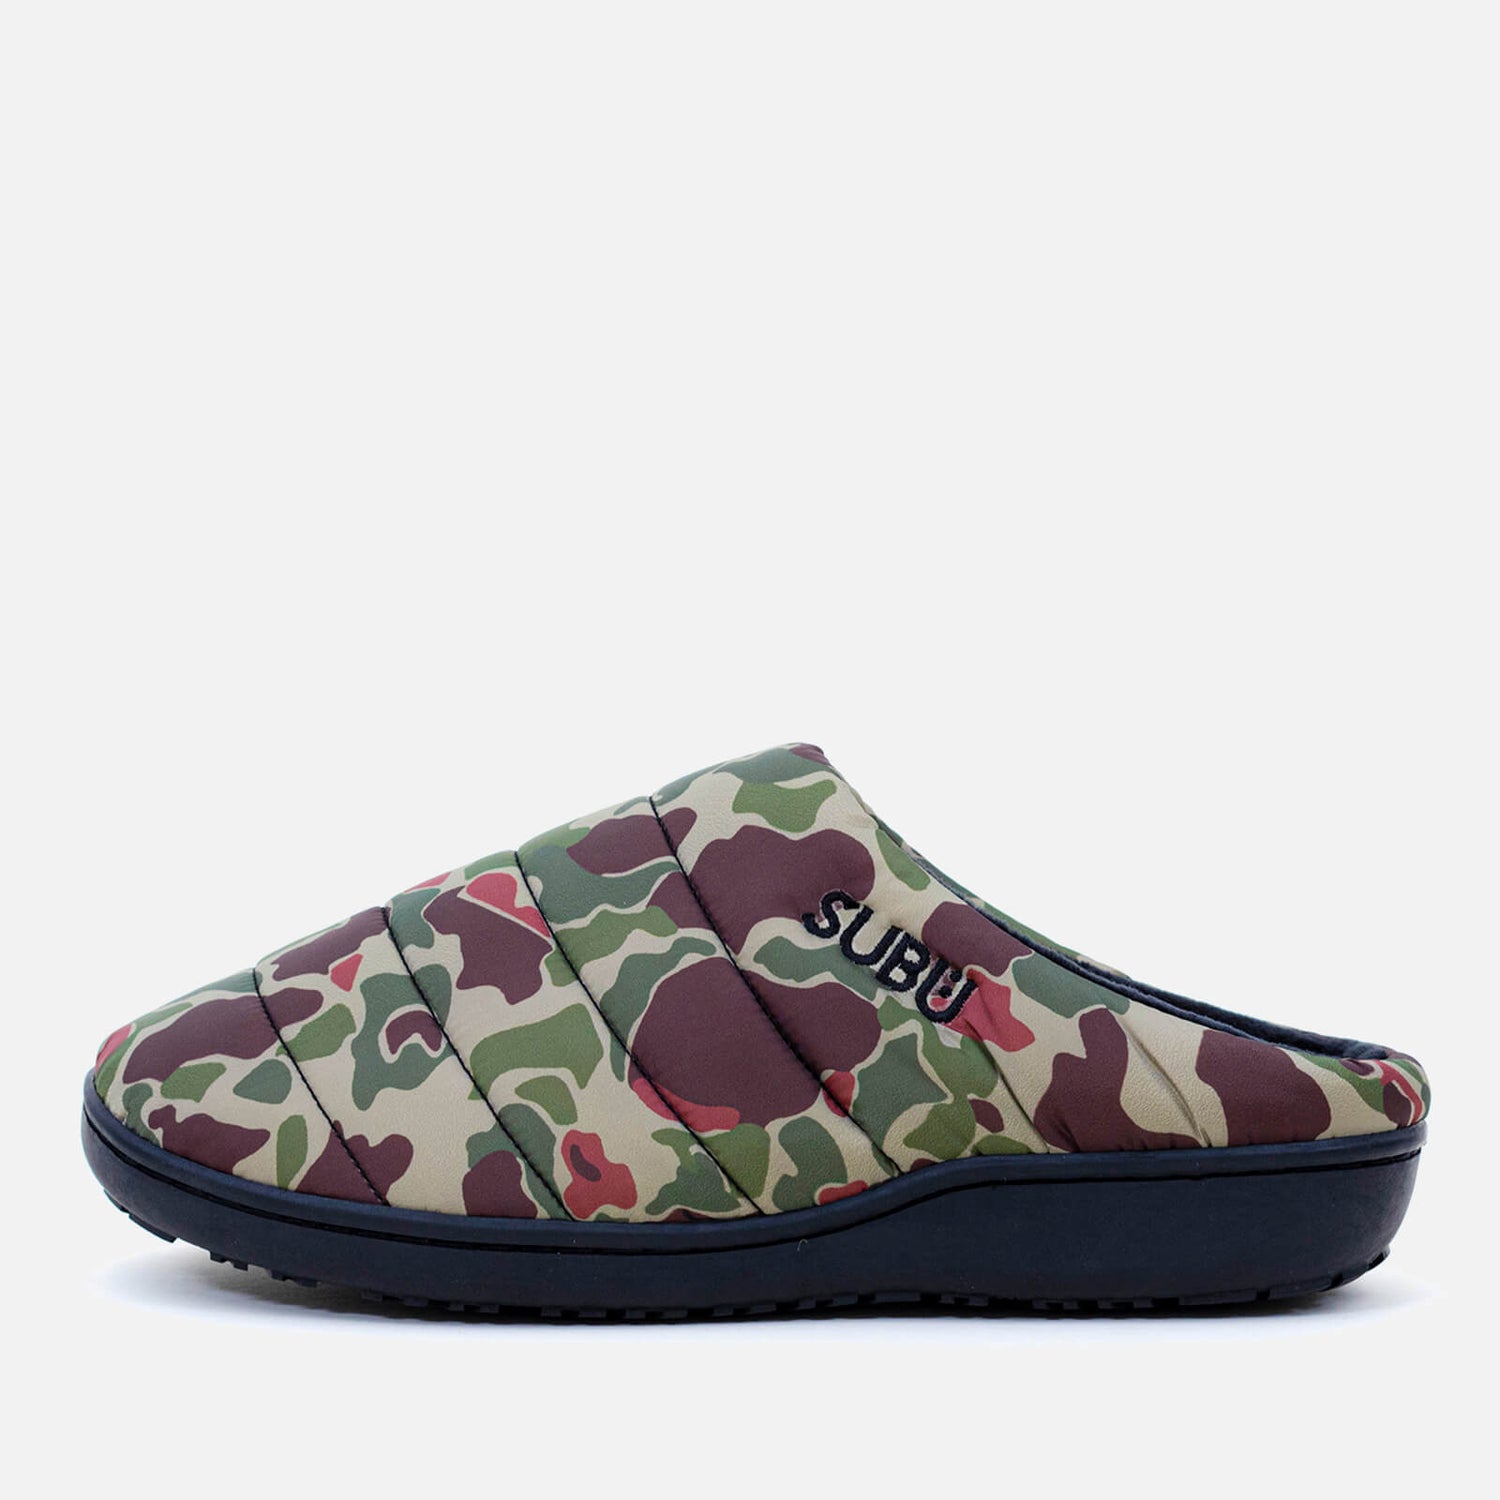 Subu Quilted Shell Slippers - UK 4.5/UK 5.5